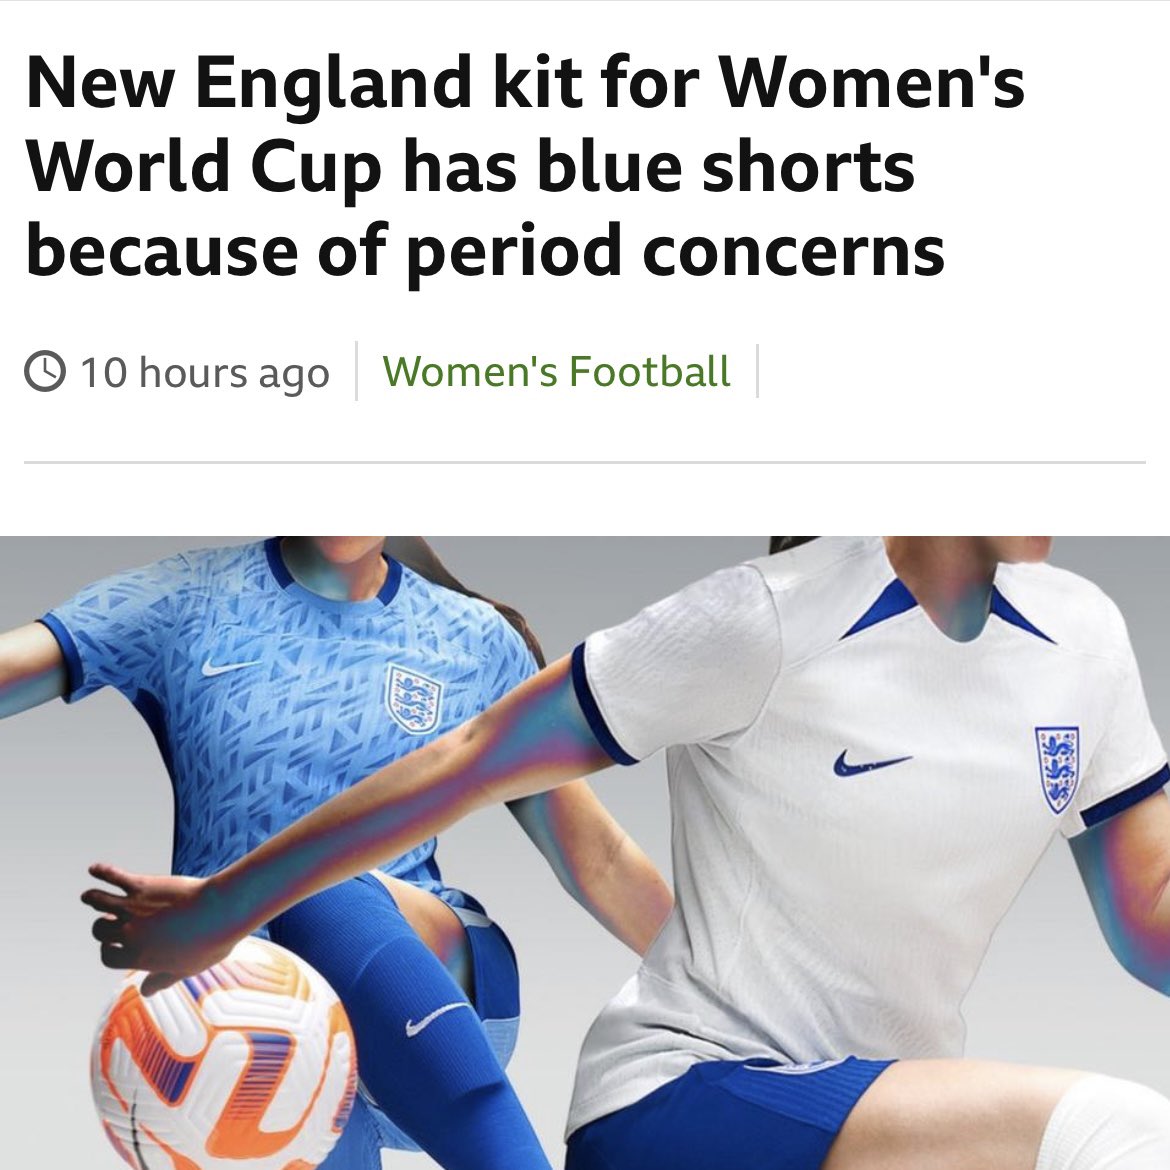 Yeah a massive step forward as England’s team will wear blue shorts instead of white at this summer's Women's World Cup ⚽️ following players requesting better support for periods 🩸💜
#perioddignity #periodpositive #football #worldcup